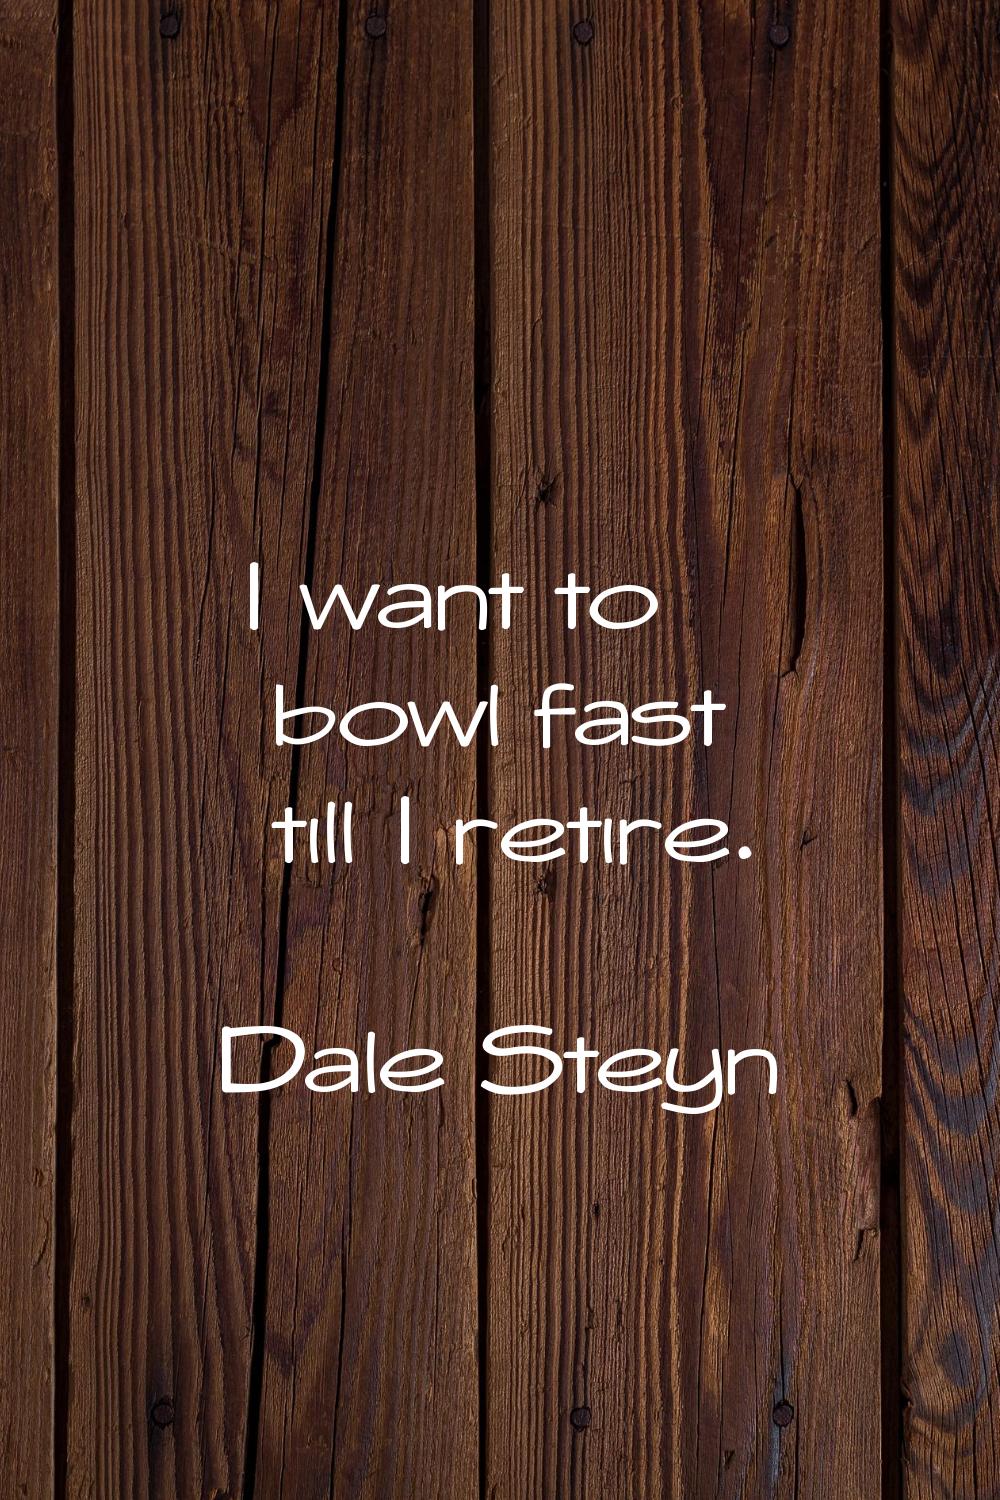 I want to bowl fast till I retire.